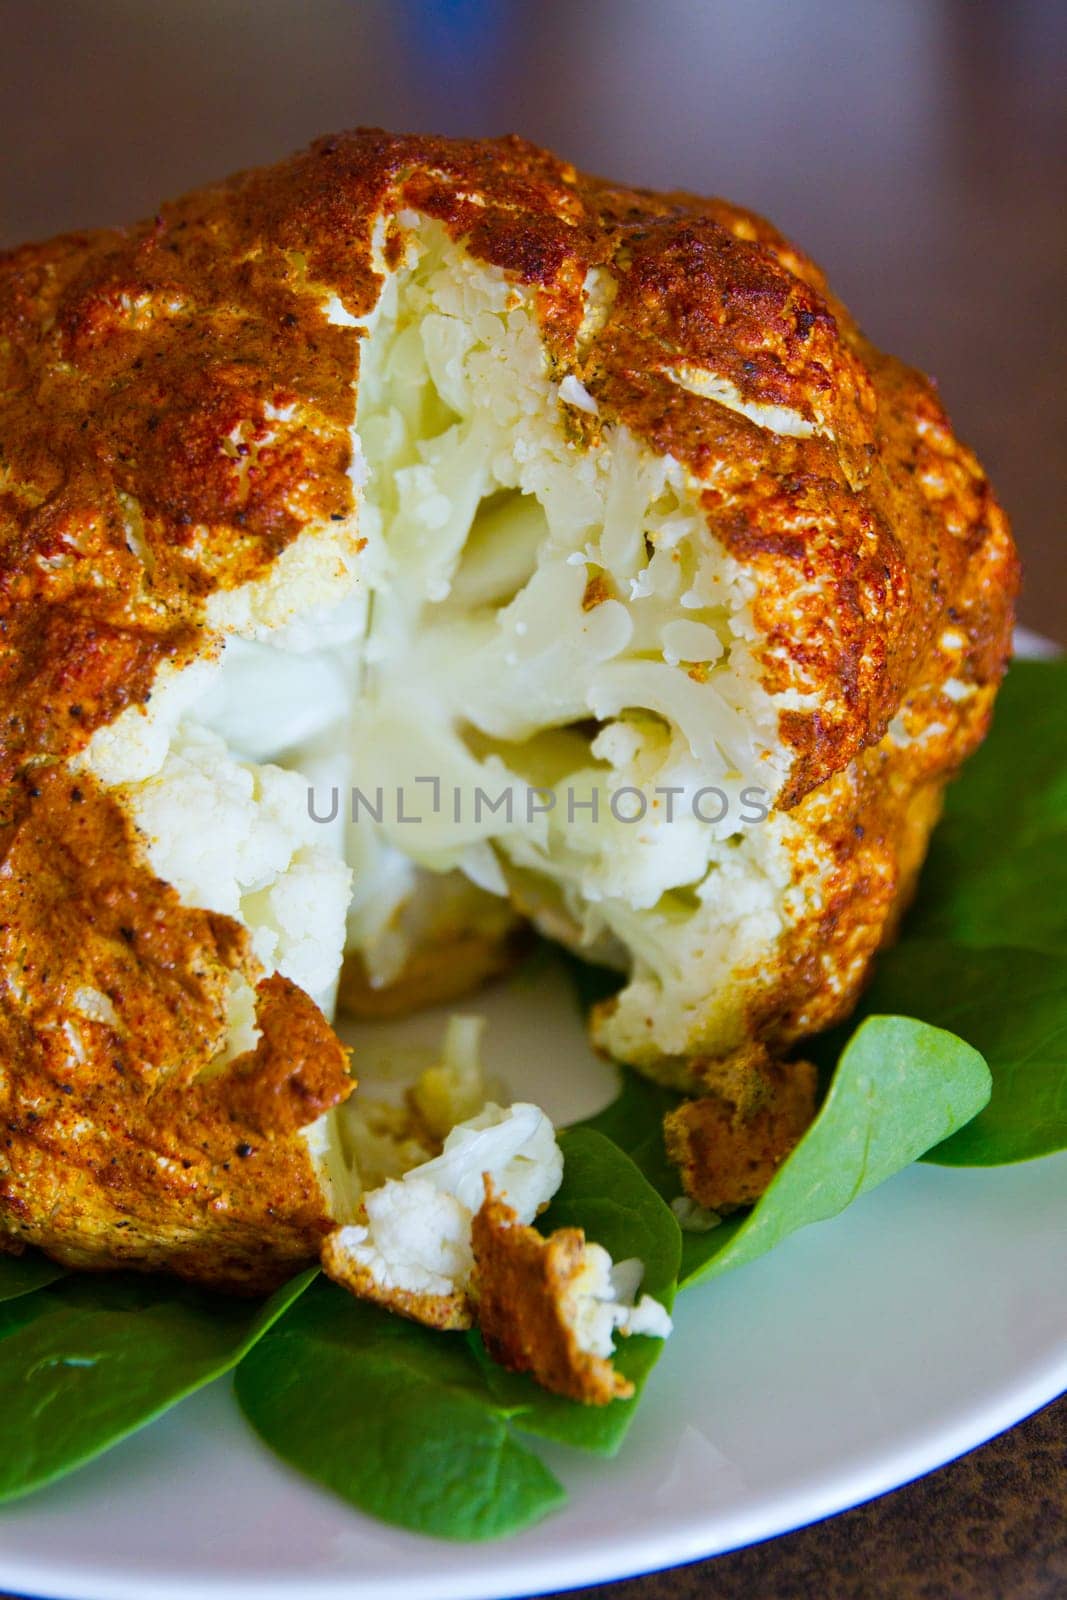 Spiced Roasted Cauliflower on Fresh Spinach Bed Close-Up by njproductions